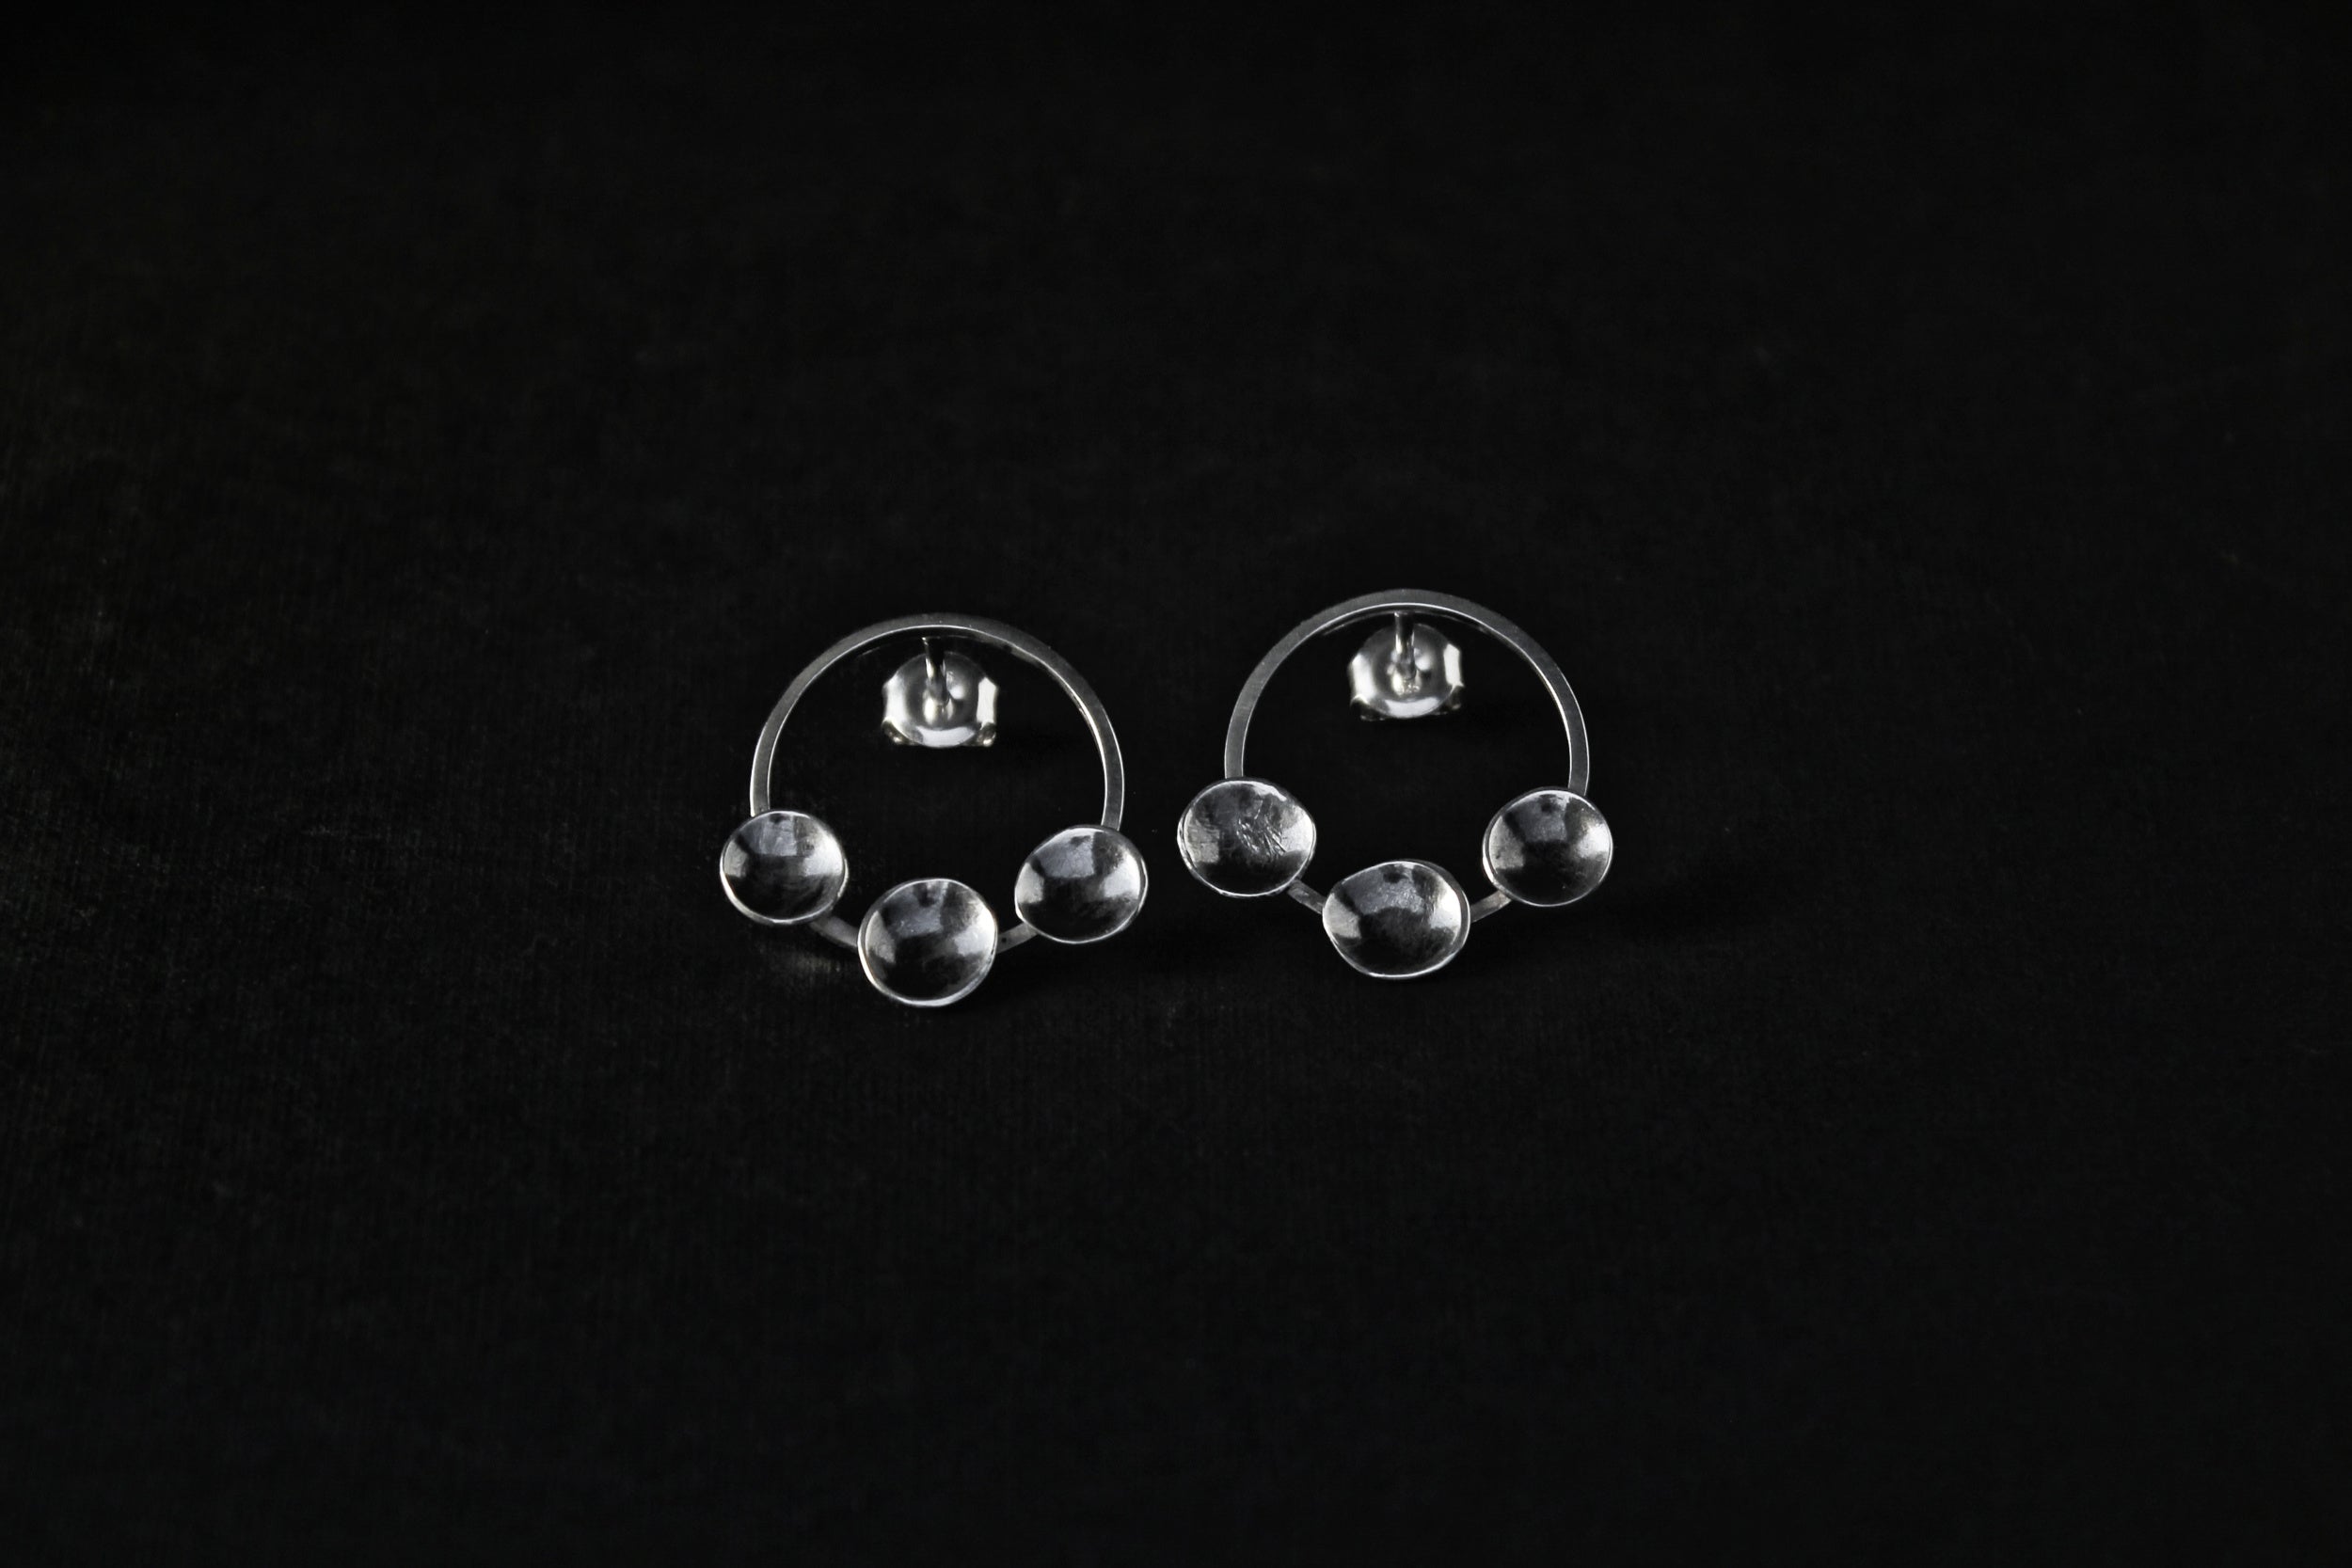 Handcrafted round silver earrings with three discs - Natt Jewellery